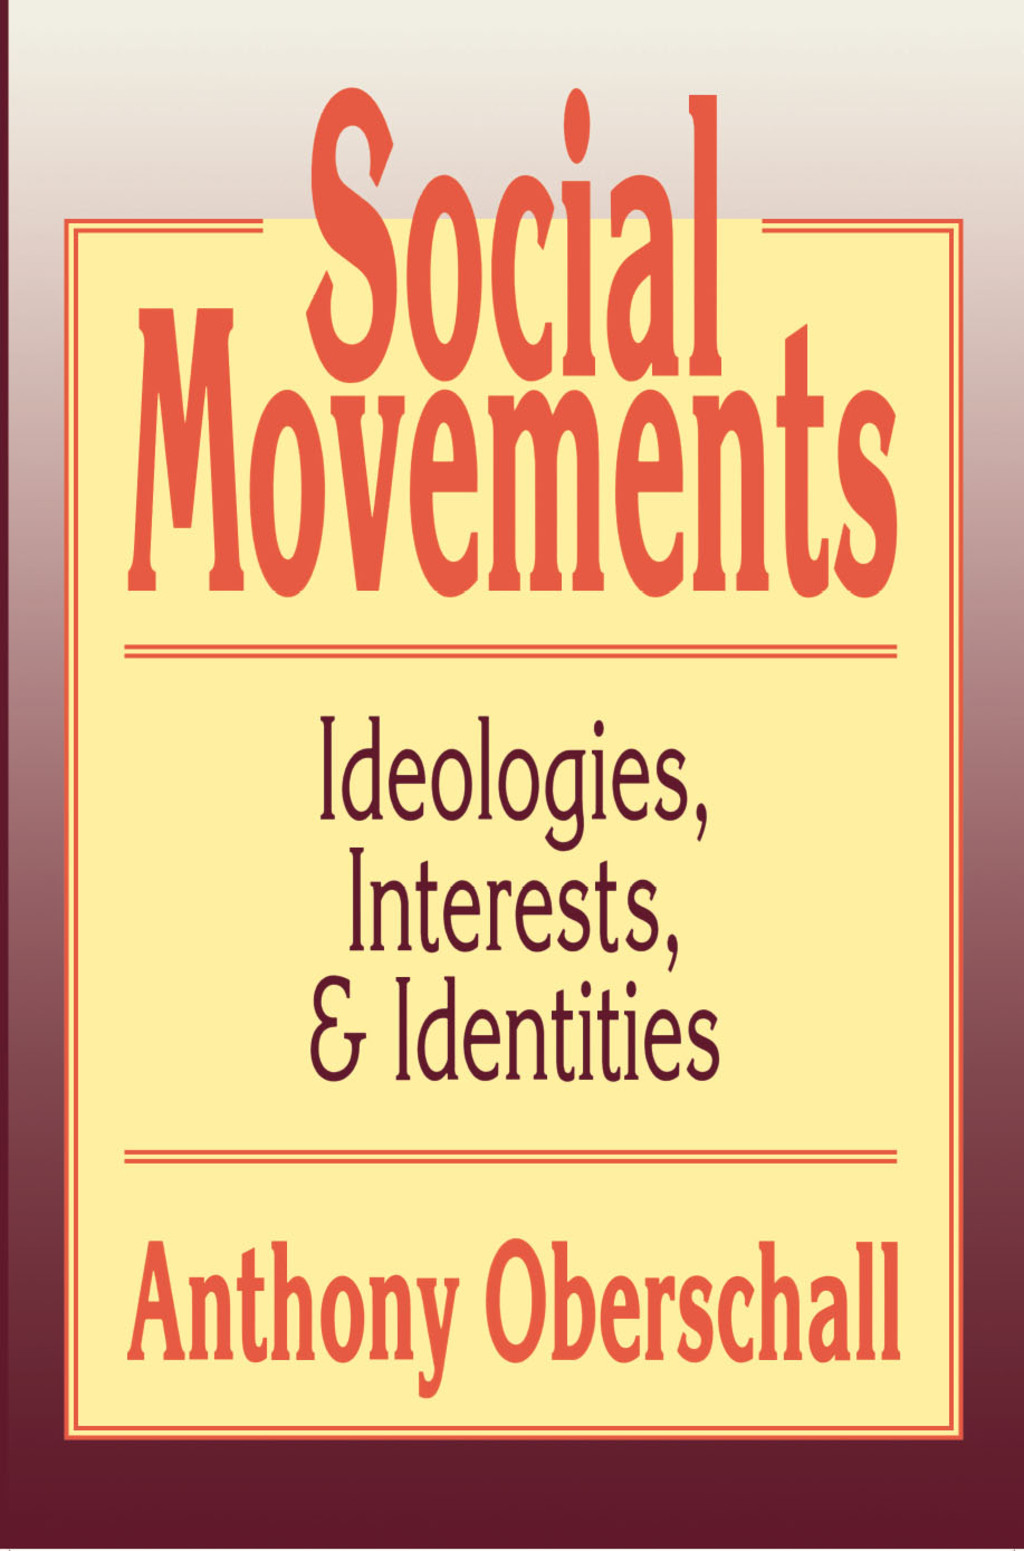 ISBN 9781560000112 product image for Social Movements - 1st Edition (eBook Rental) | upcitemdb.com